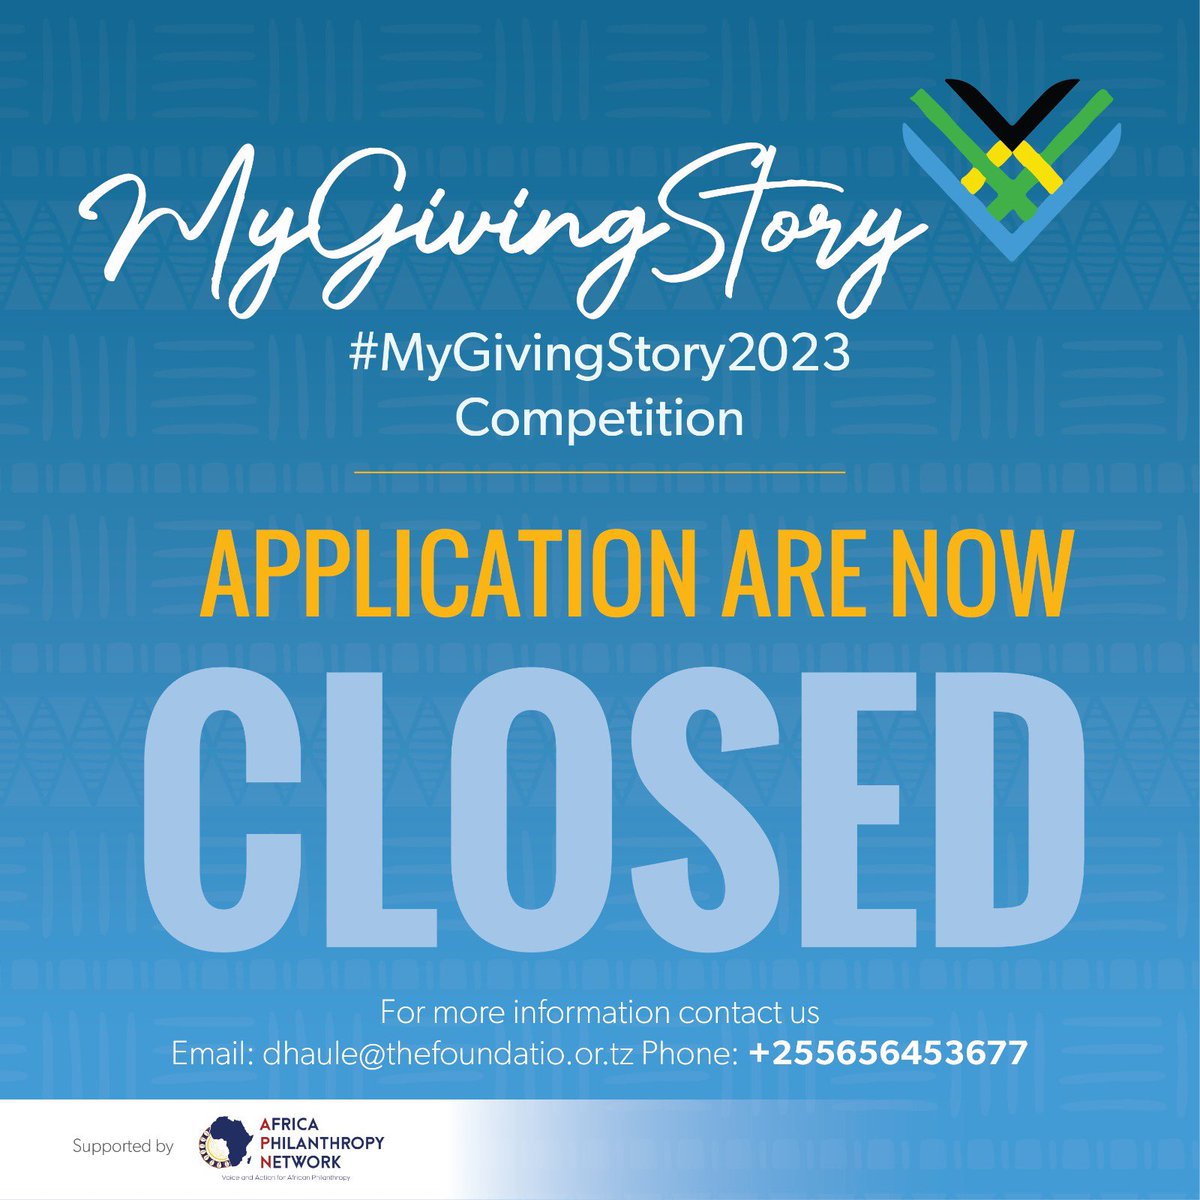 🚨 APPLICATIONS CLOSED 🚨 We're thrilled with the incredible 65 entries for #MyGivingStory2023. Thank you to everyone who shared their inspiring acts of giving and now our judges have their work cut out for them! Stay connected for more updates! @InfoAPN @FCSTZ